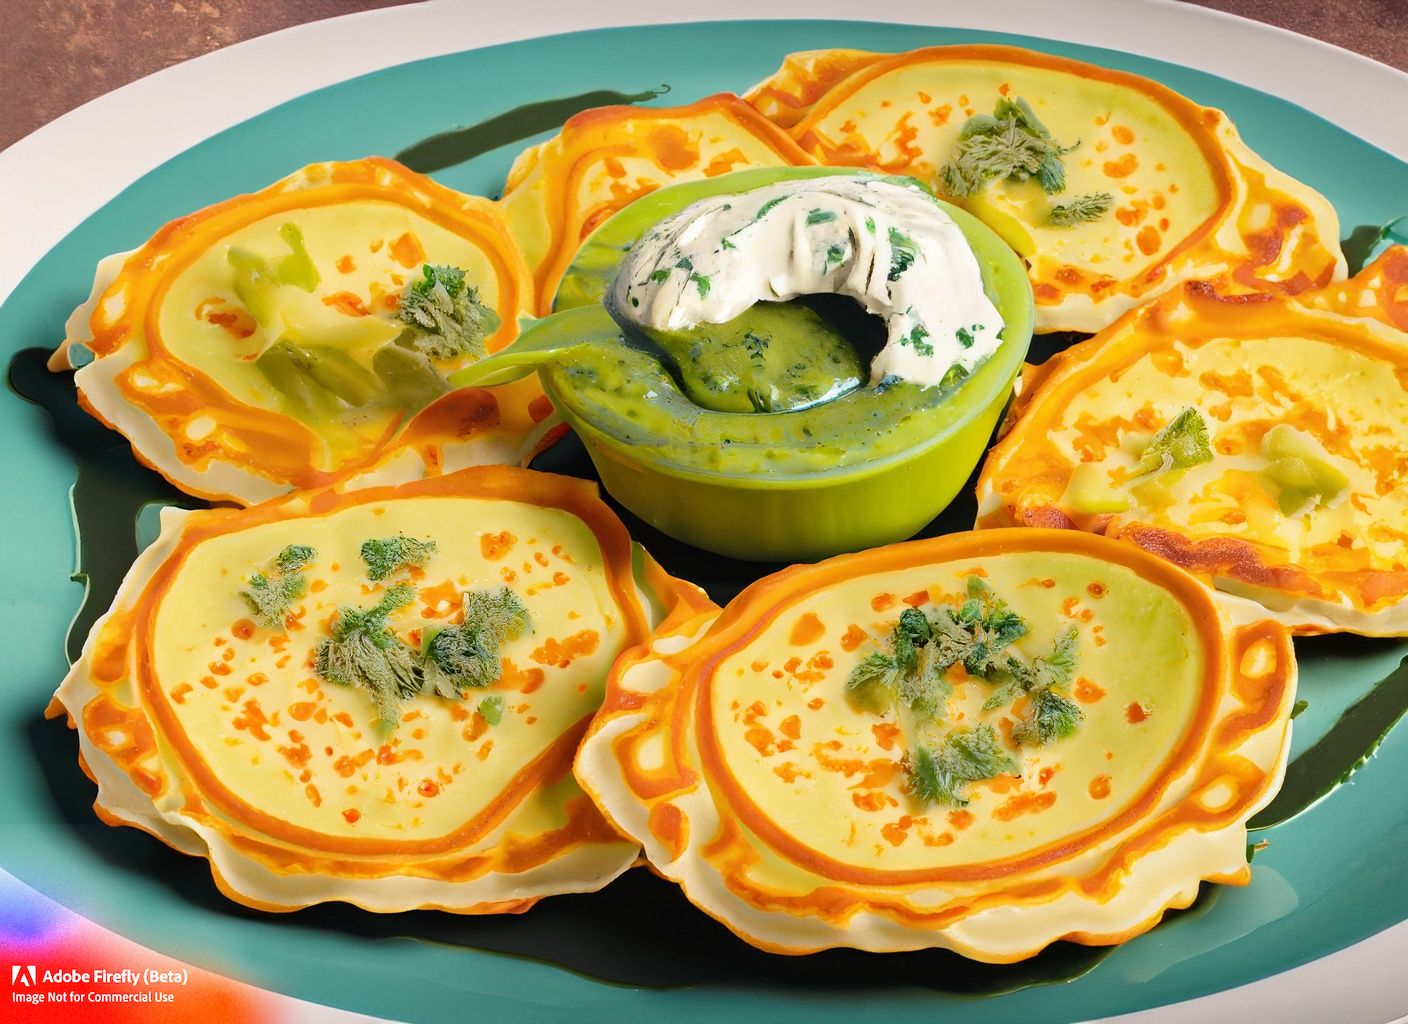 A colorful, mouthwatering plate of squash blossom pancakes stuffed with cotija cheese, immersed in green sauce.